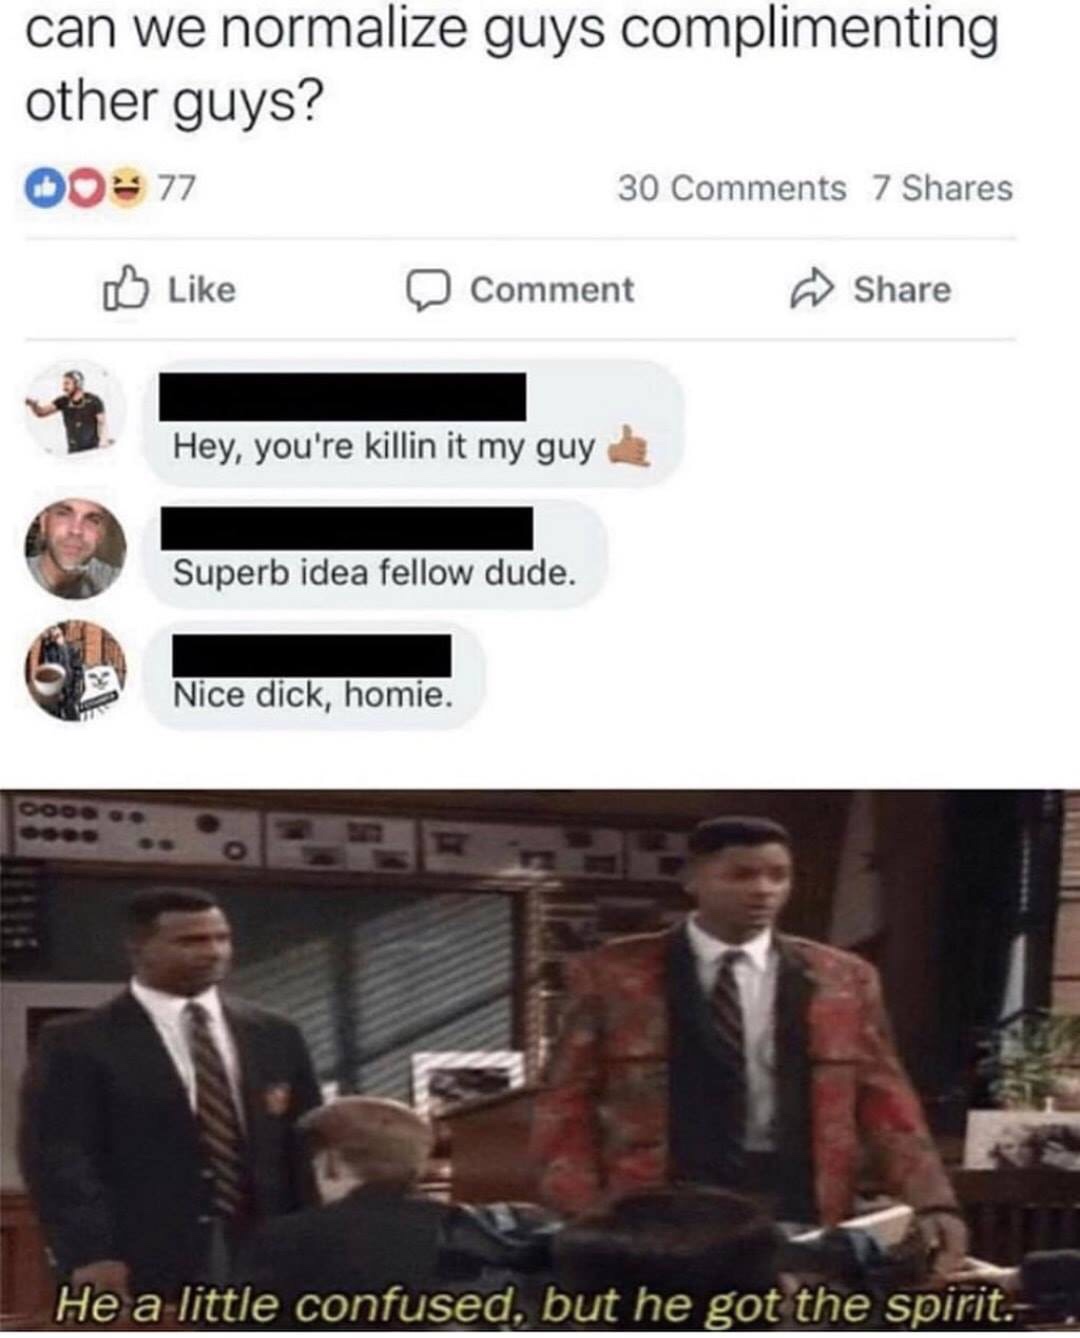 he is a little confused but he got the spirit - can we normalize guys complimenting other guys? 00 77 30 7 Comment nment Hey, you're killin it my guy Superb idea fellow dude. Nice dick, homie. Ooo. He a little confused, but he got the spirit.